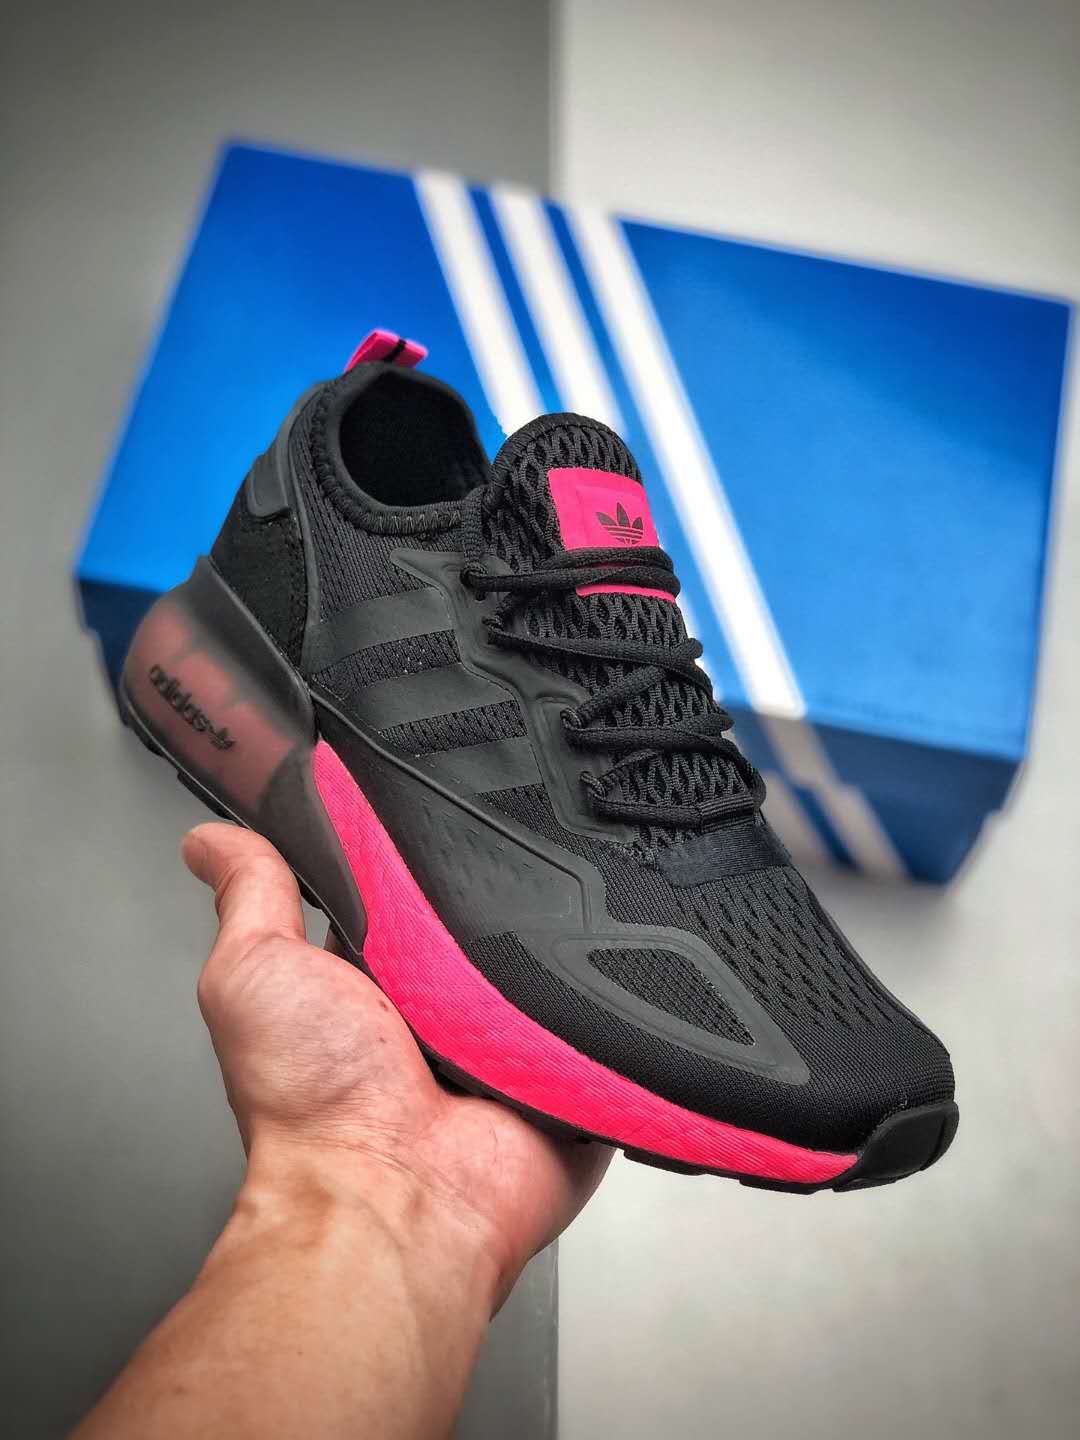 Adidas ZX 2K Boost 'Black Shock Pink' FV8986 - Stylish and Comfortable Sneakers